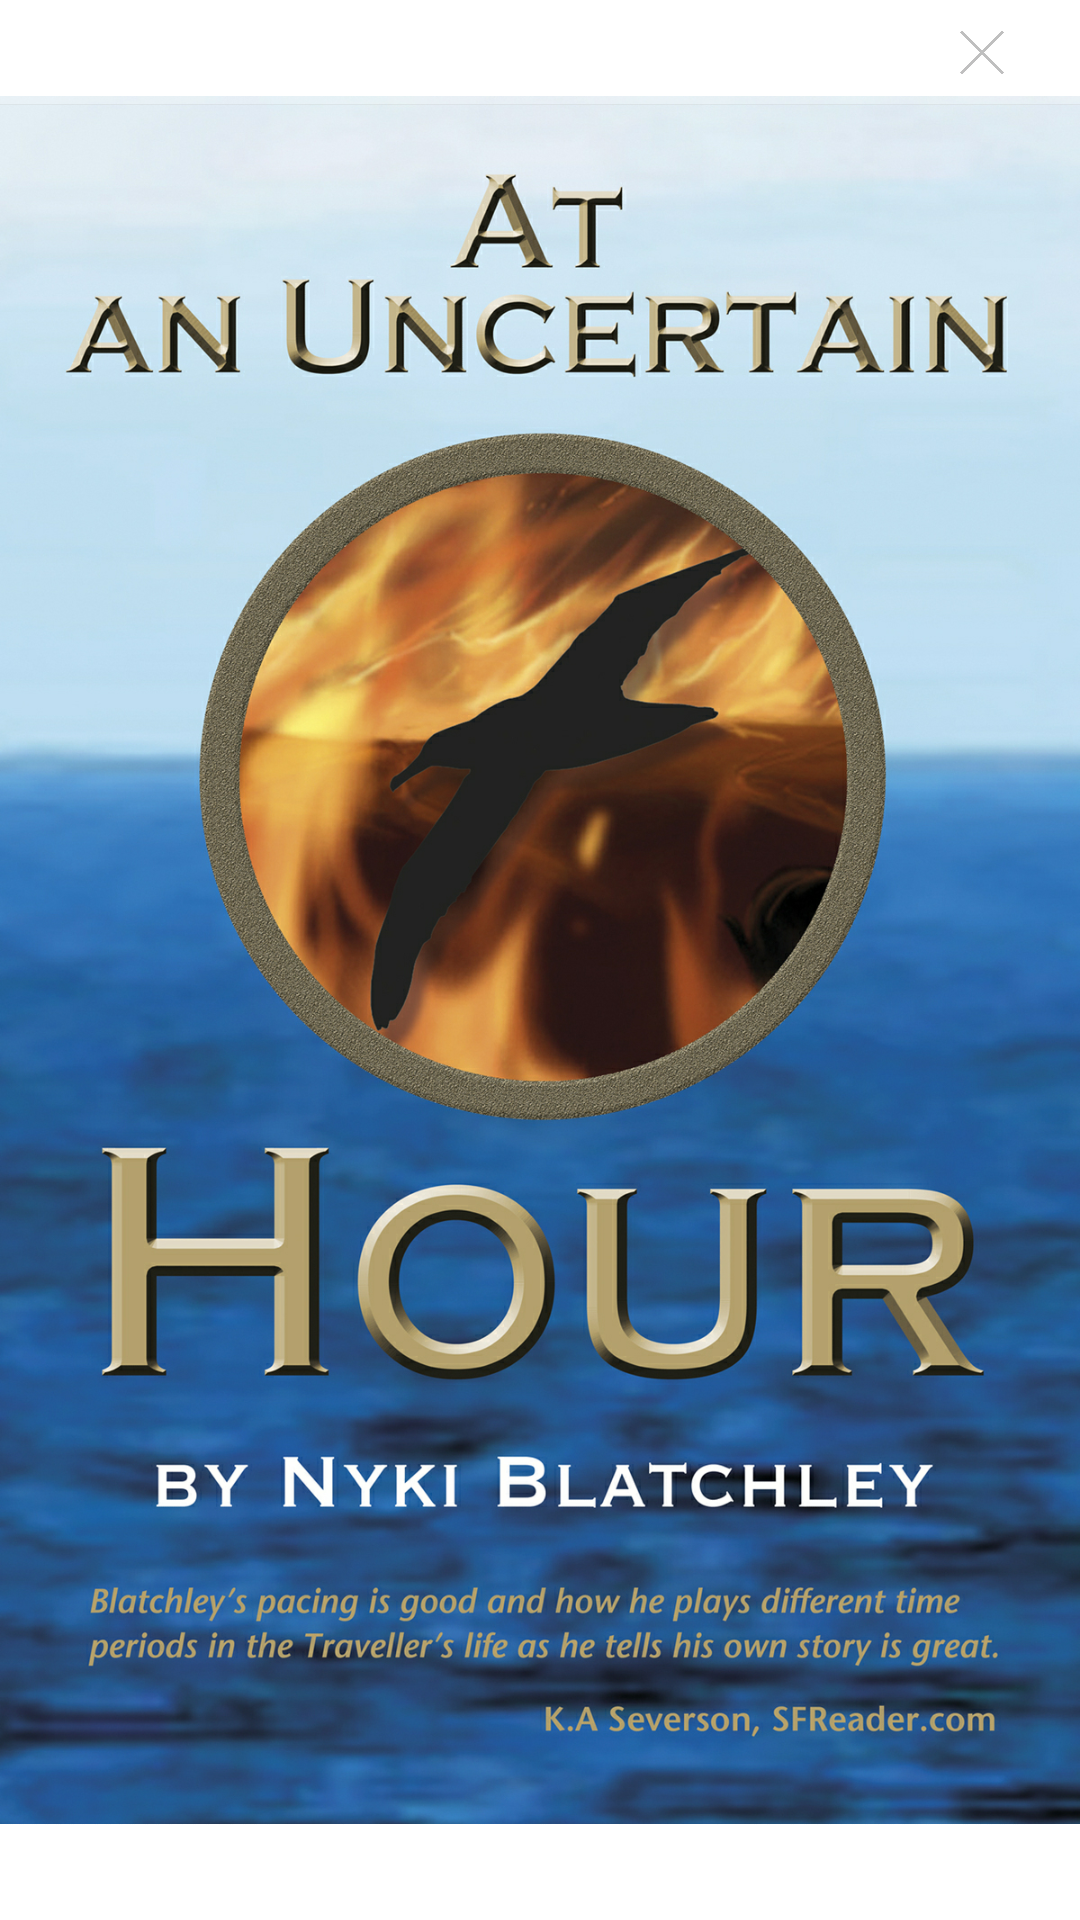 At An Uncertain Hour by Nyki Blatchley